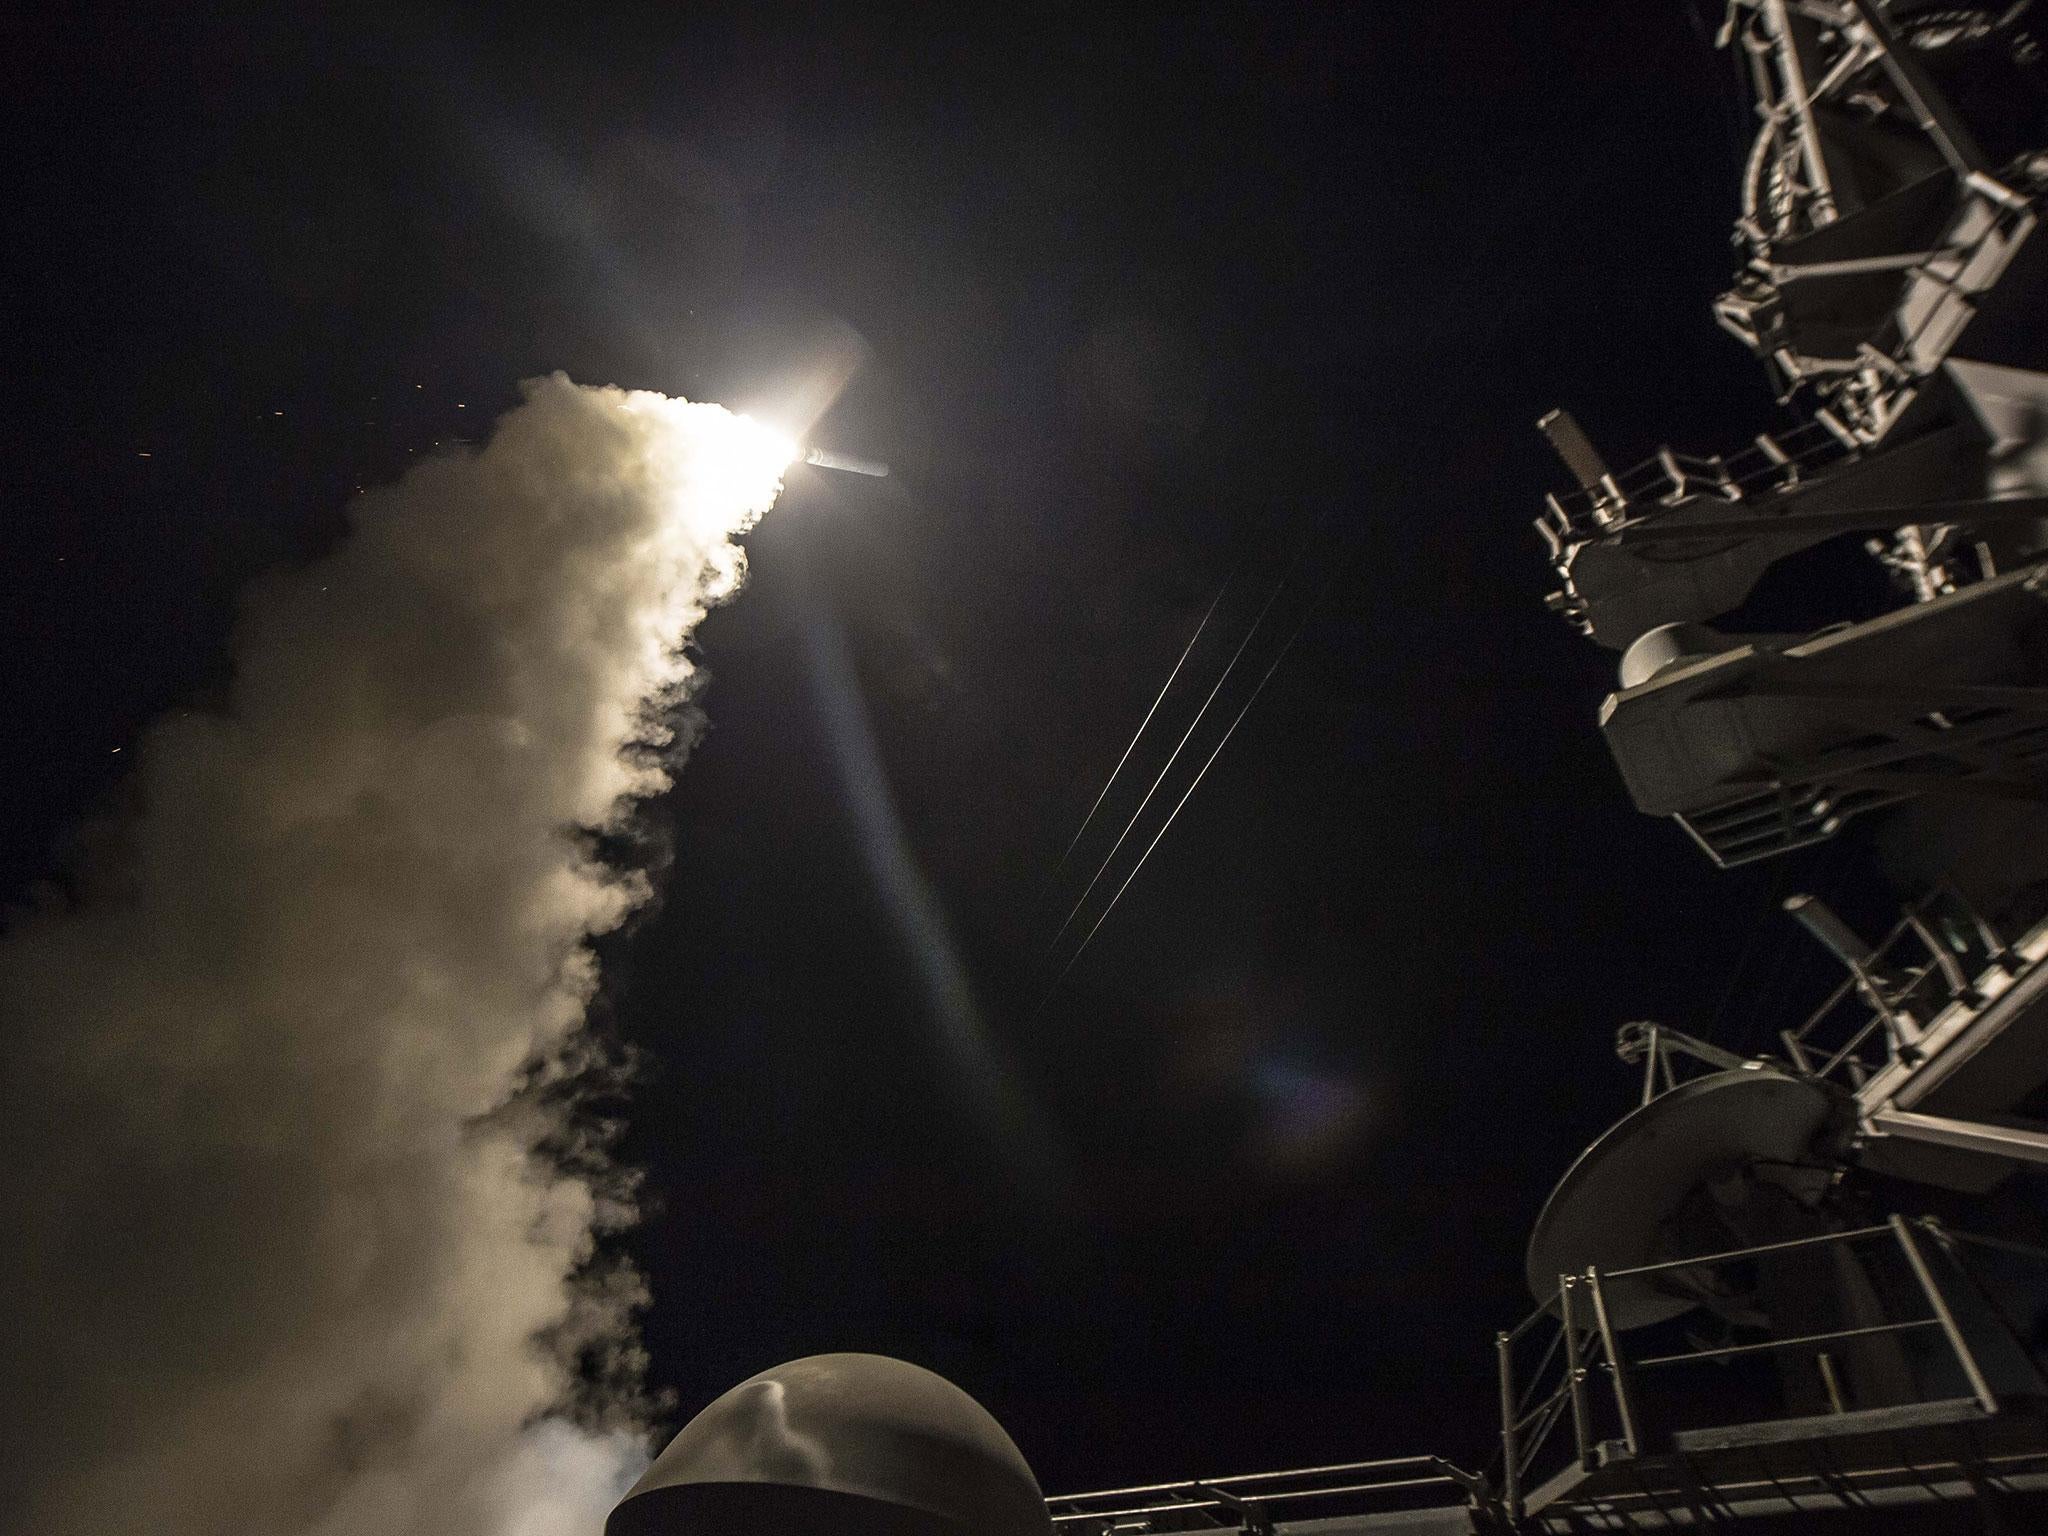 Dozens of Tomahawk cruise missiles were launched from two US Navy ships in the Mediterranean